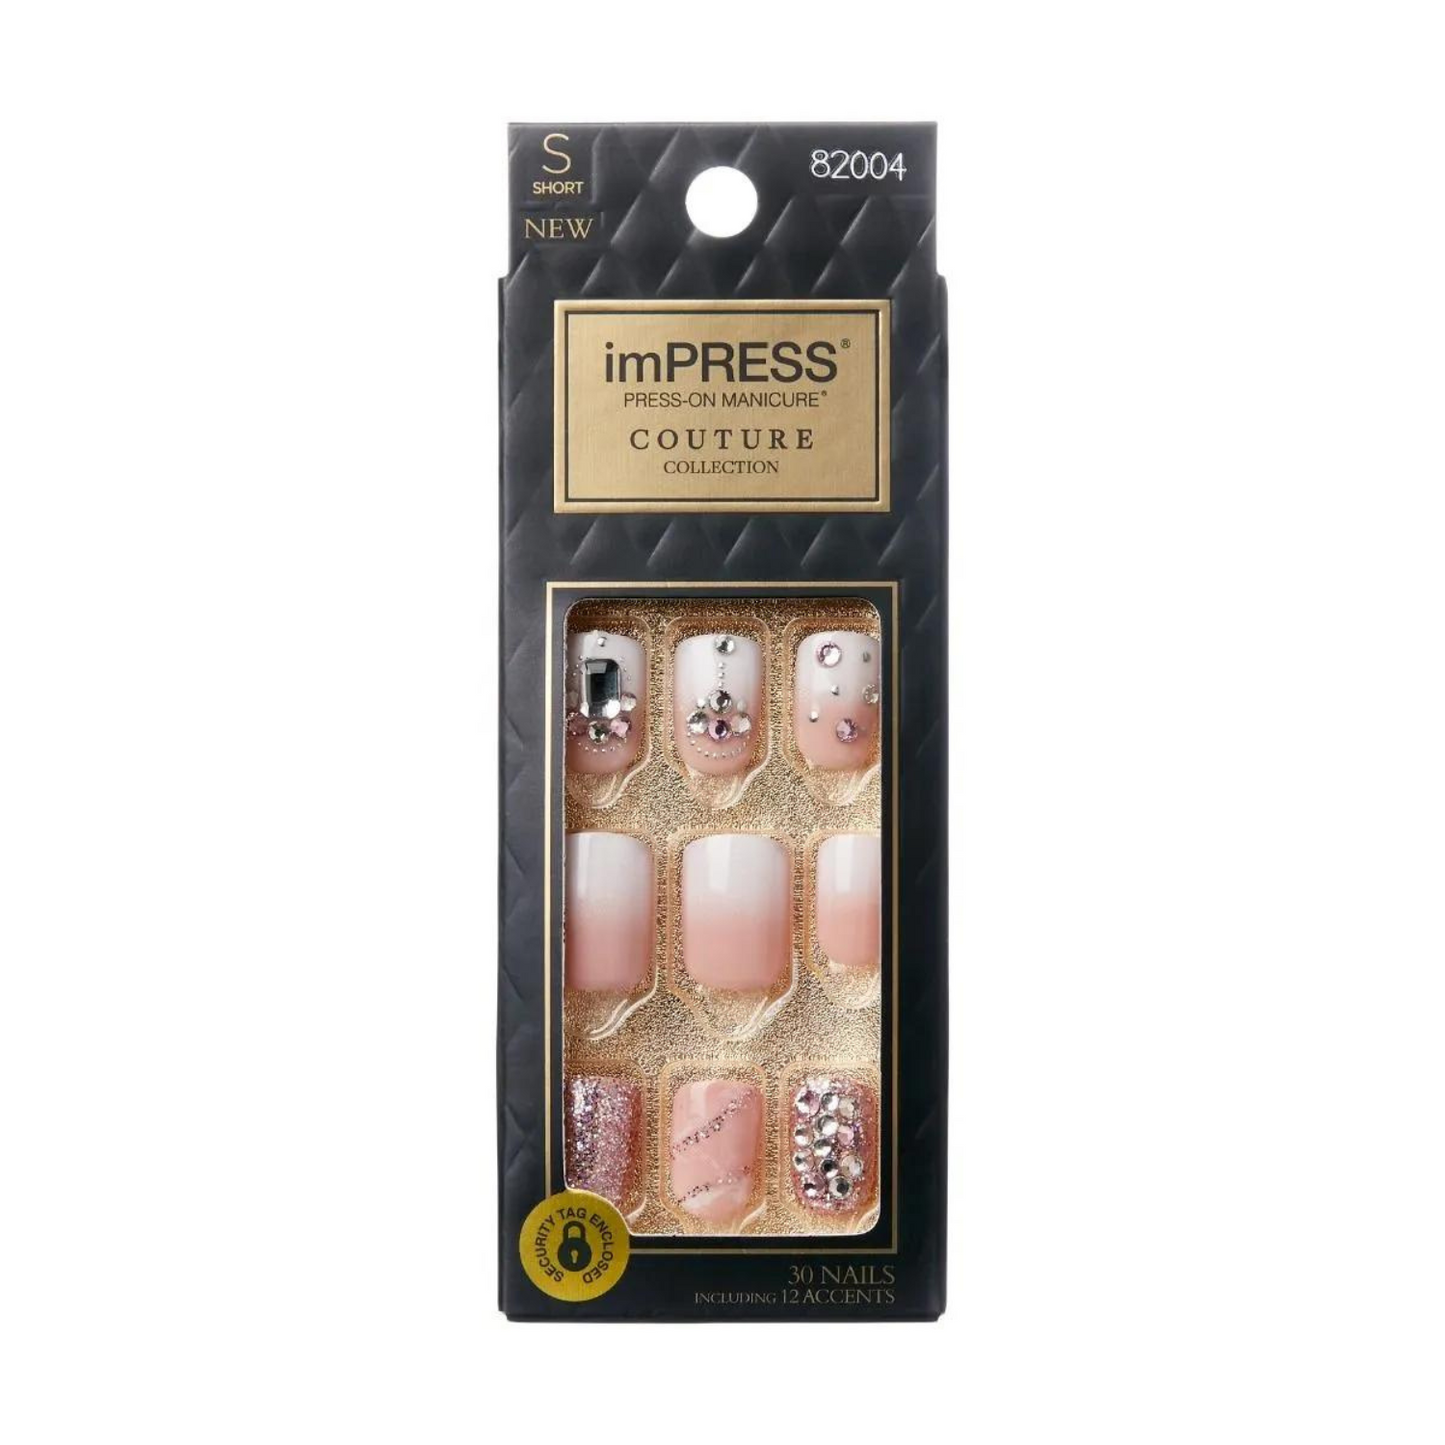 imPress Press-on Manicure Couture Collection Purity